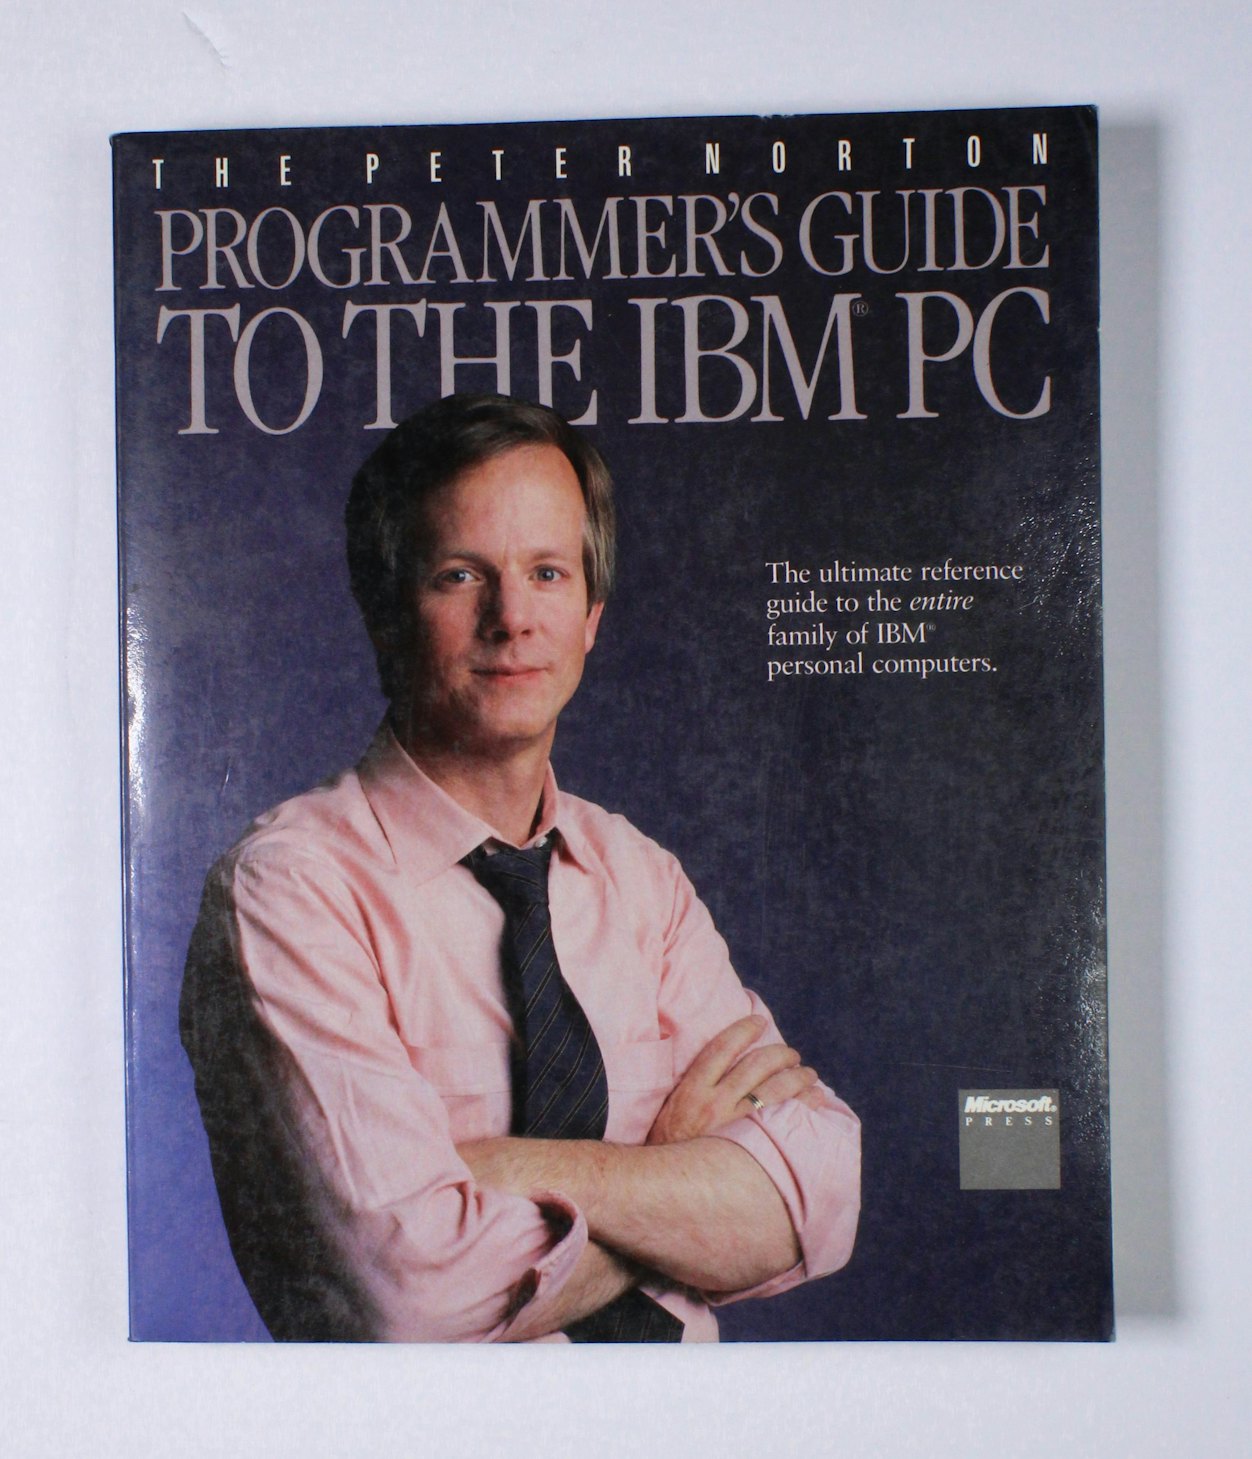 Programmer’s Guide to the IBM PC